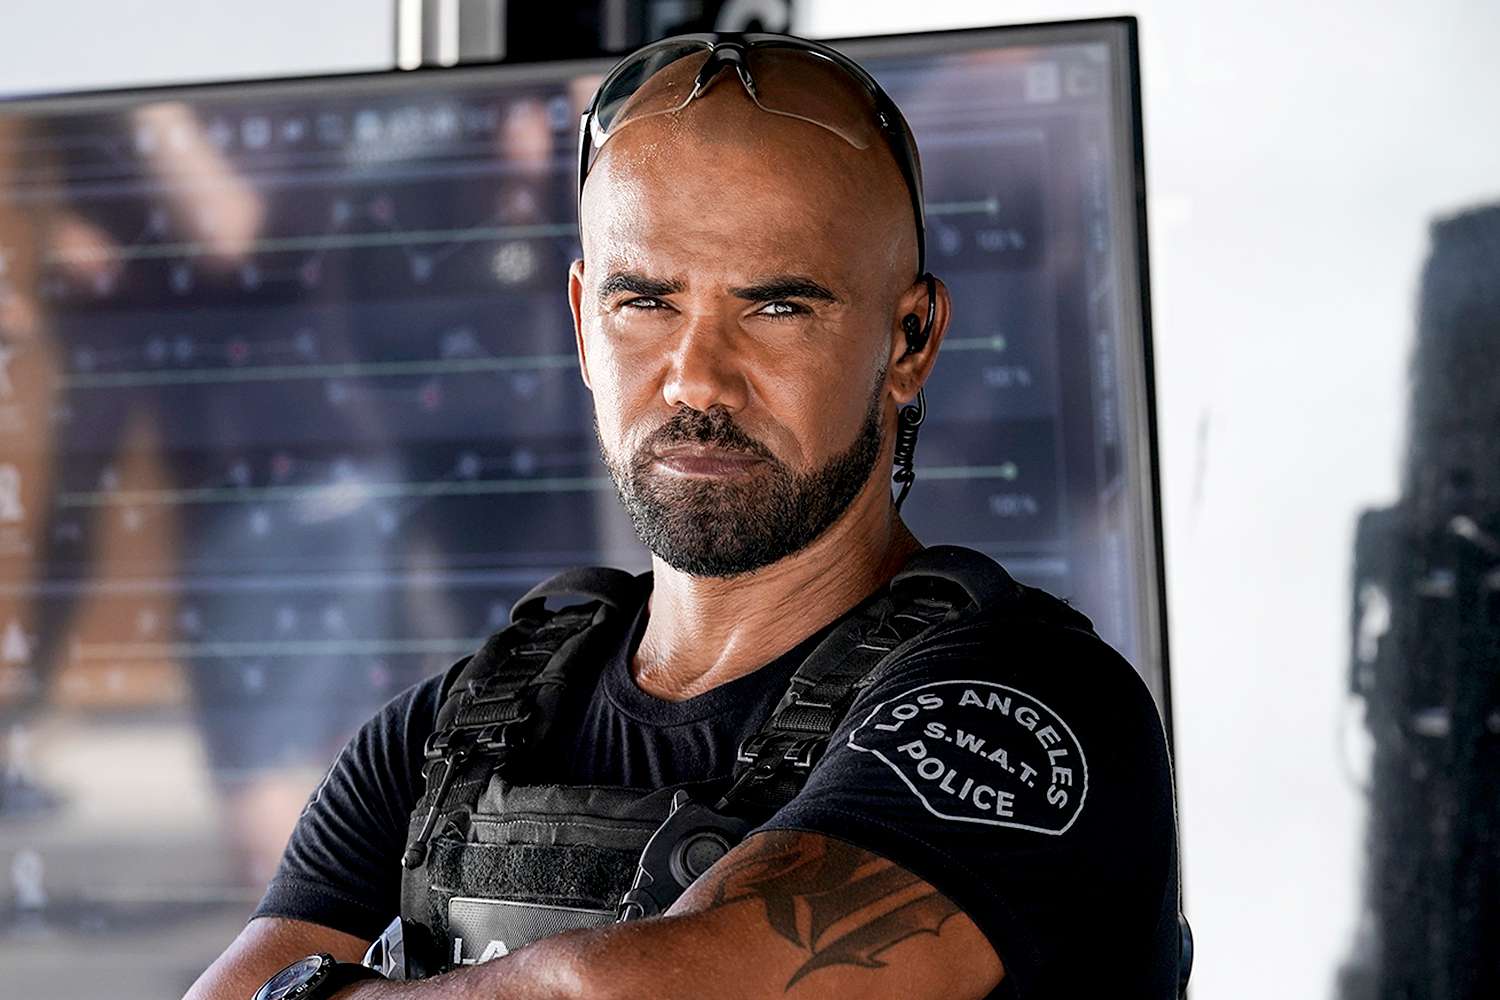 Shemar Moore Biography: Wife, Age, Height, Net Worth, Children, Siblings, Movies, Awards, Instagram